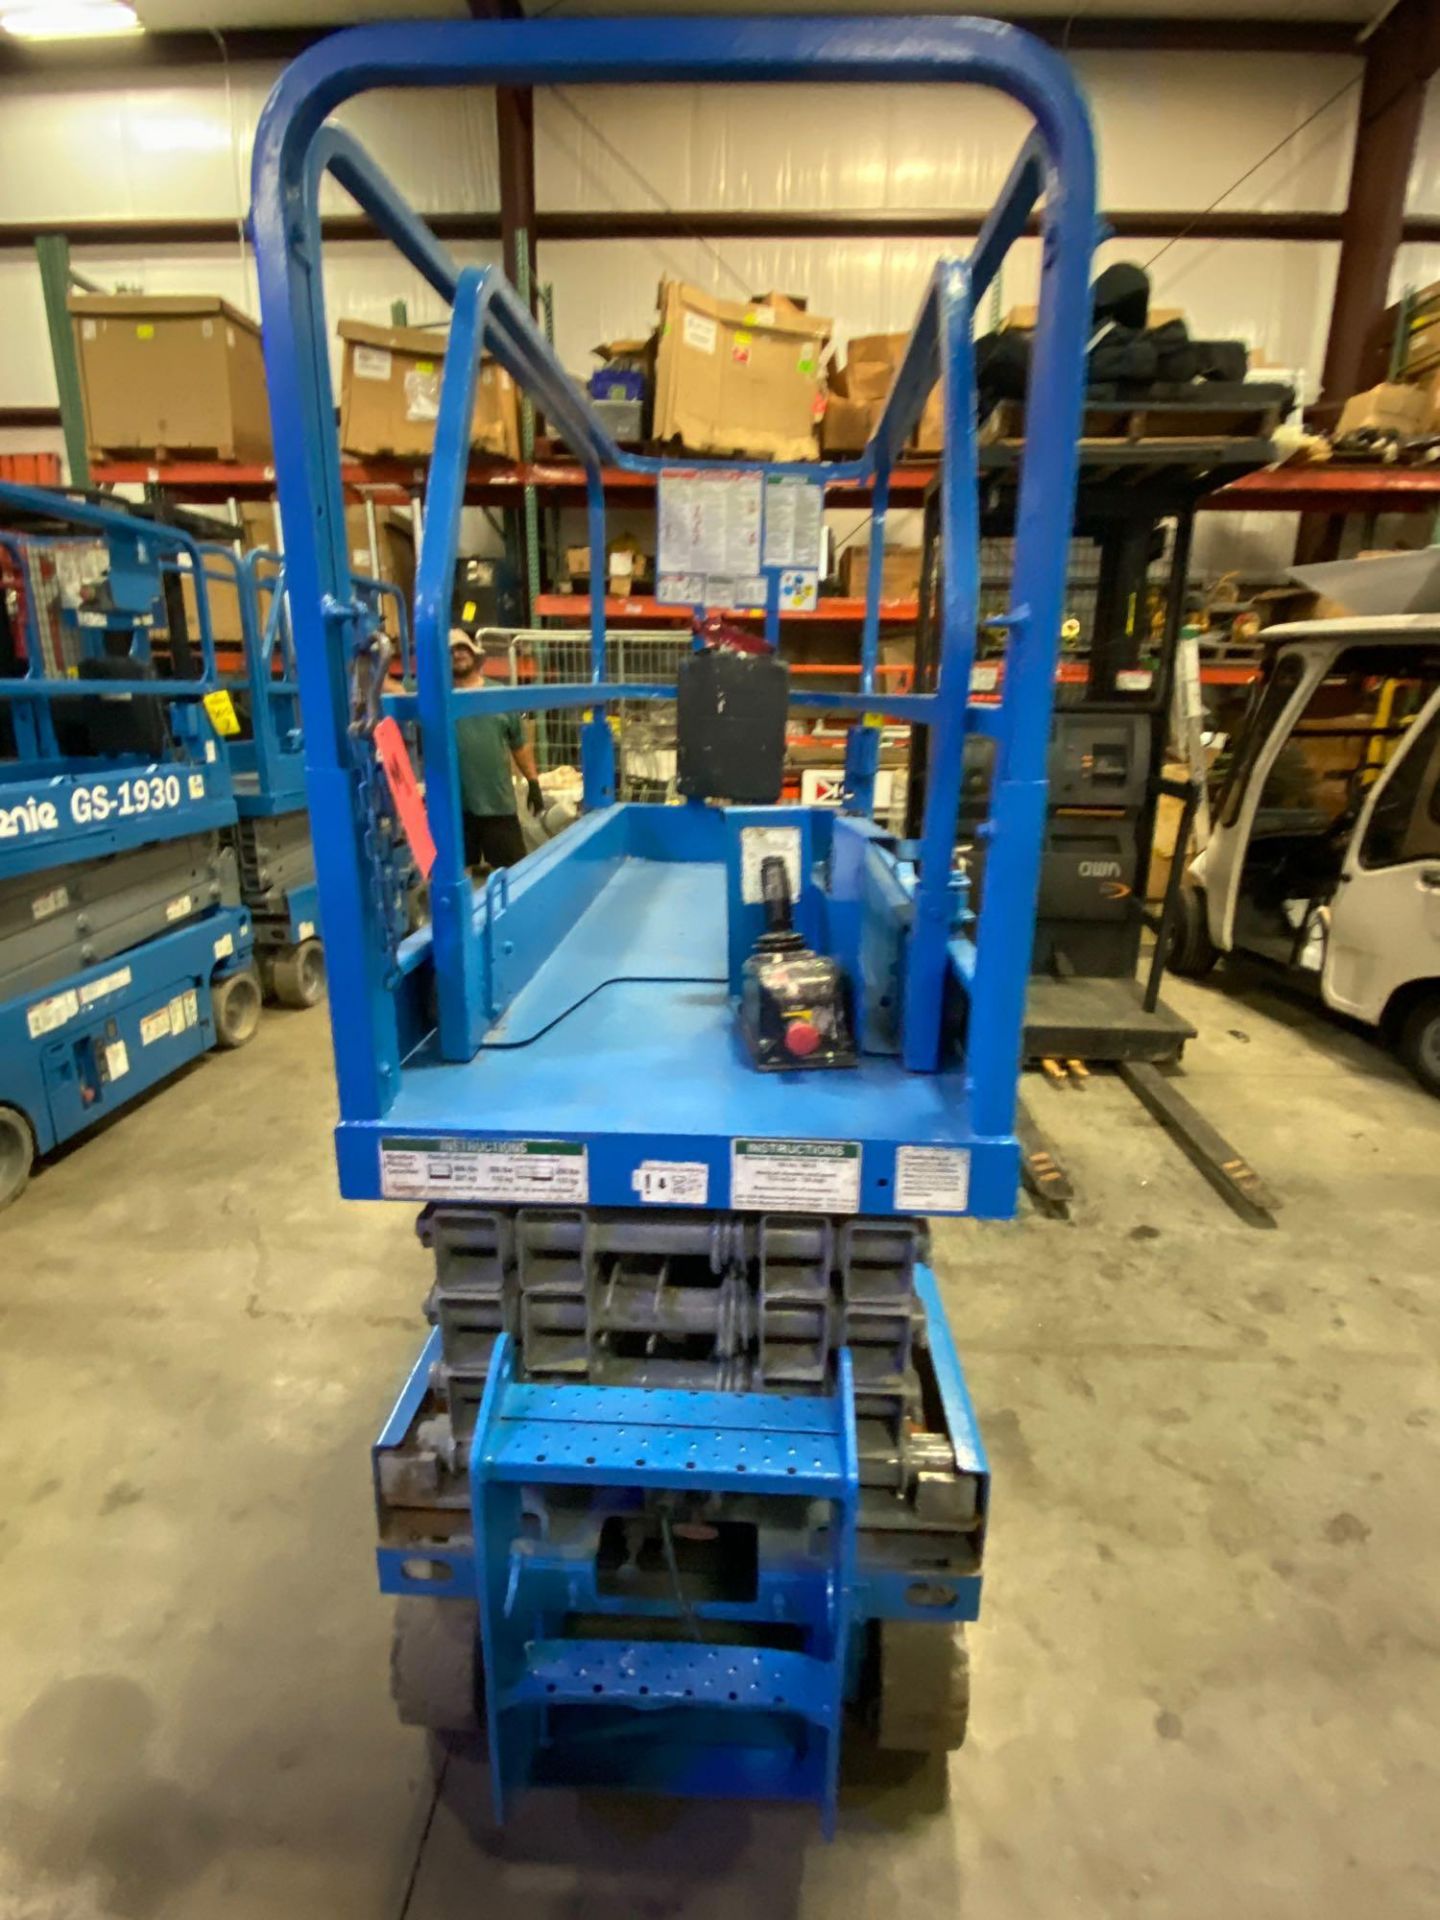 GENIE GS-1930 ELECTRIC SCISSOR LIFT, SELF PROPELLED, 19' PLATFORM HEIGHT, BUILT IN BATTERY CHARGER, - Image 3 of 5